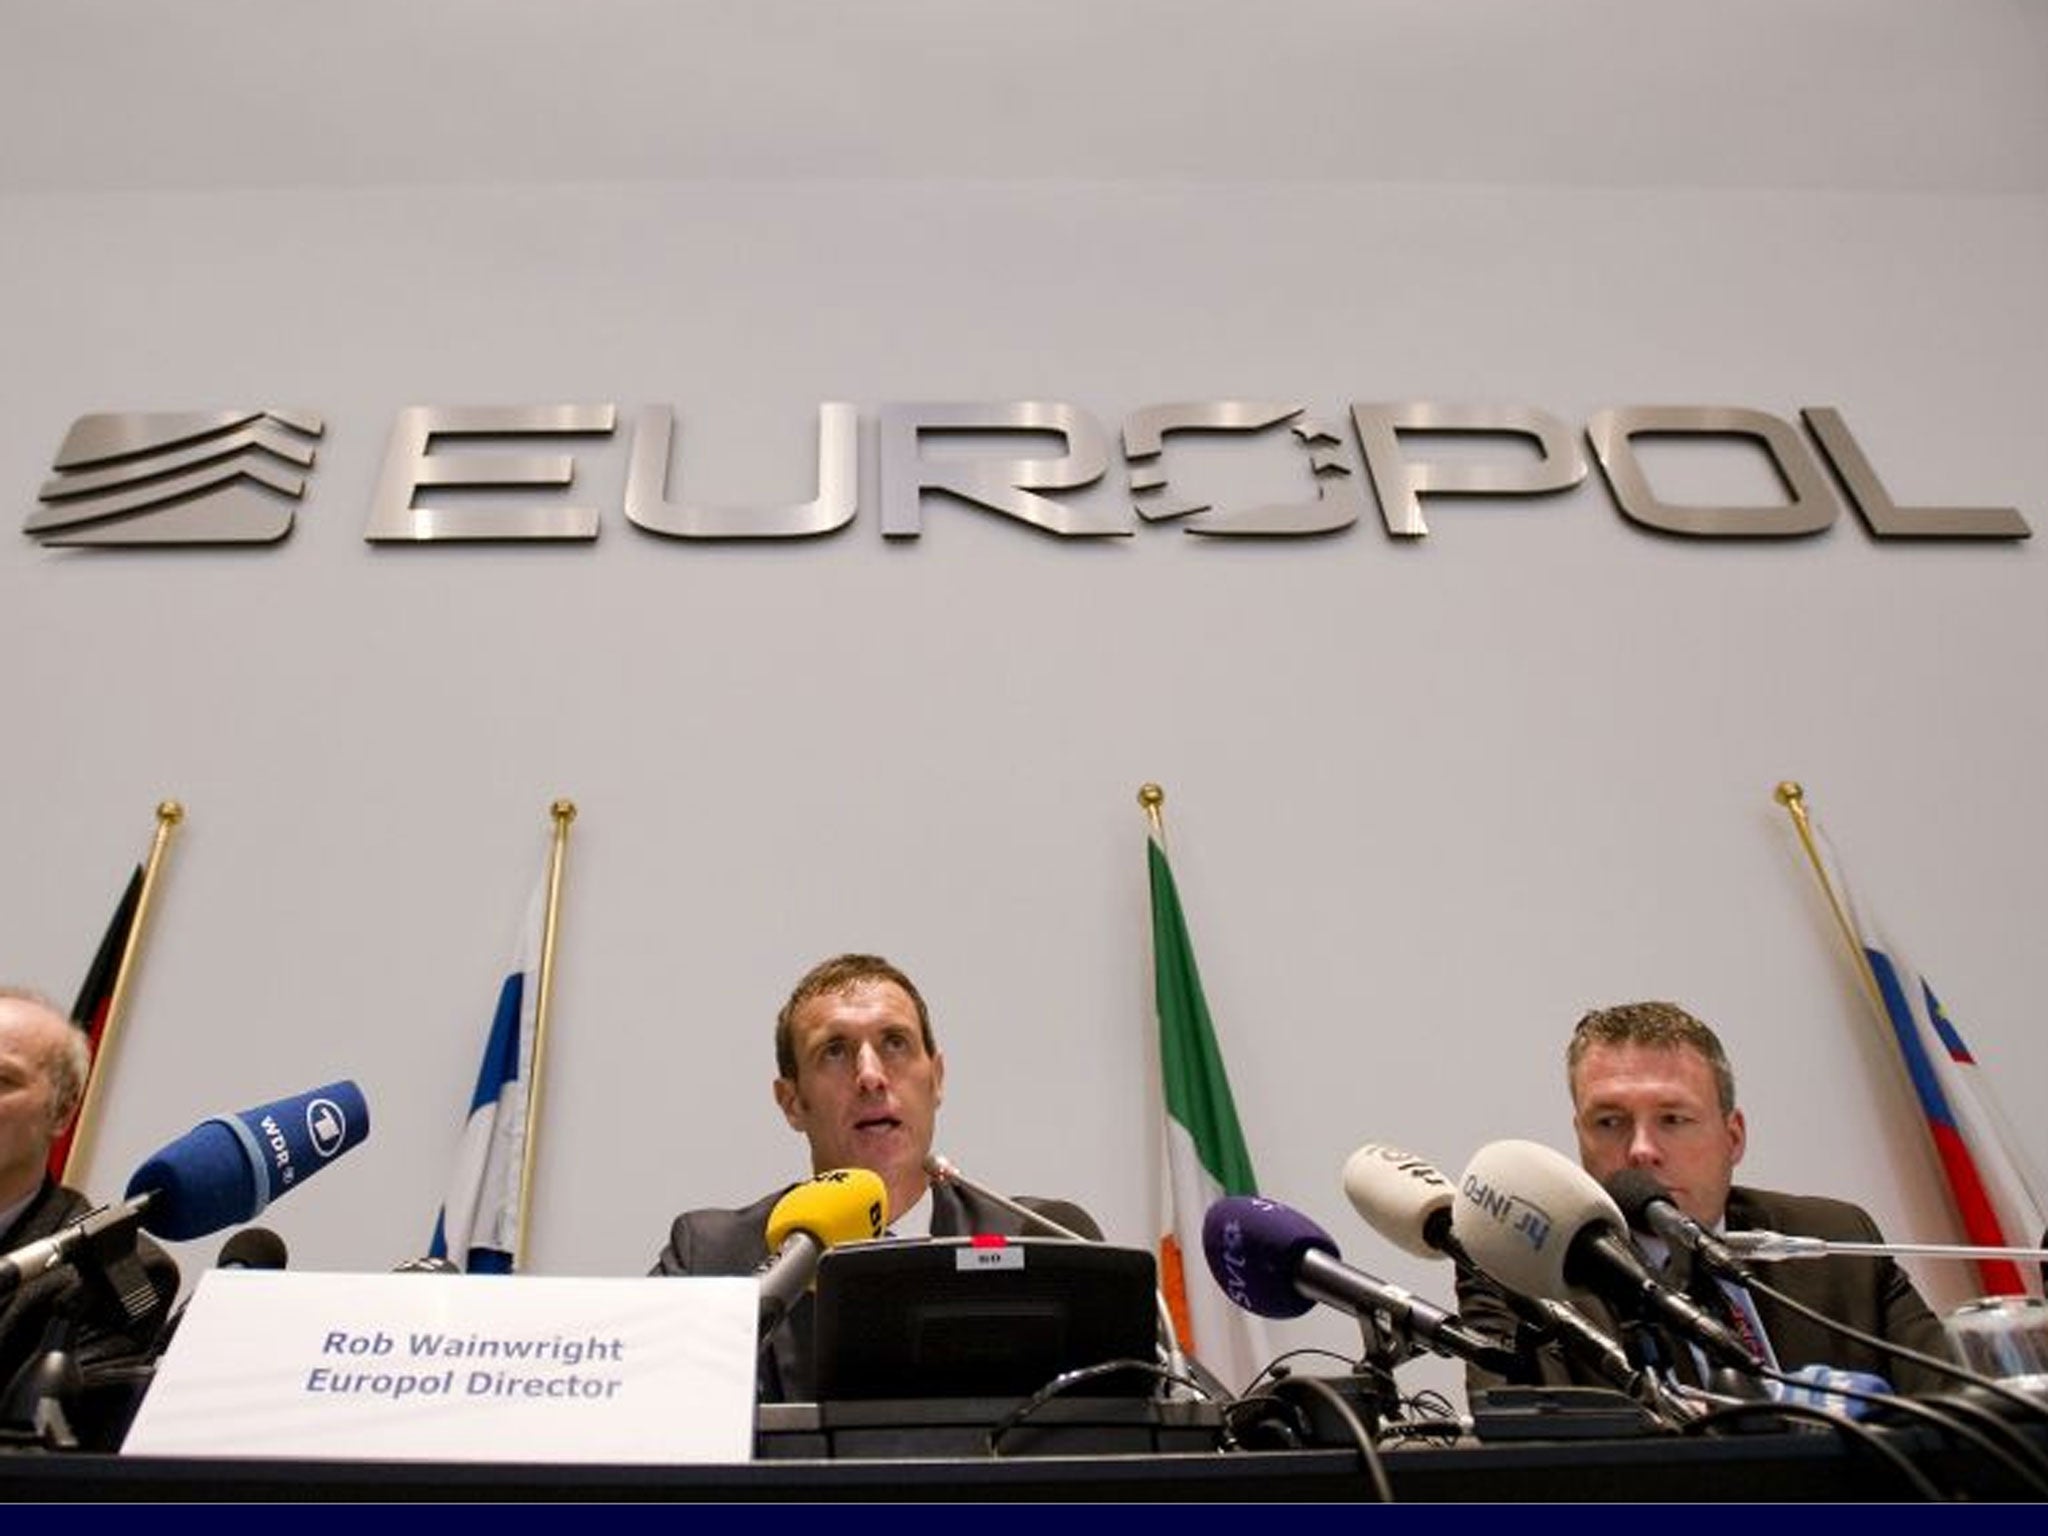 Europol director Rob Wainwright says Eastern European gangs are using budget airlines to commit crimes